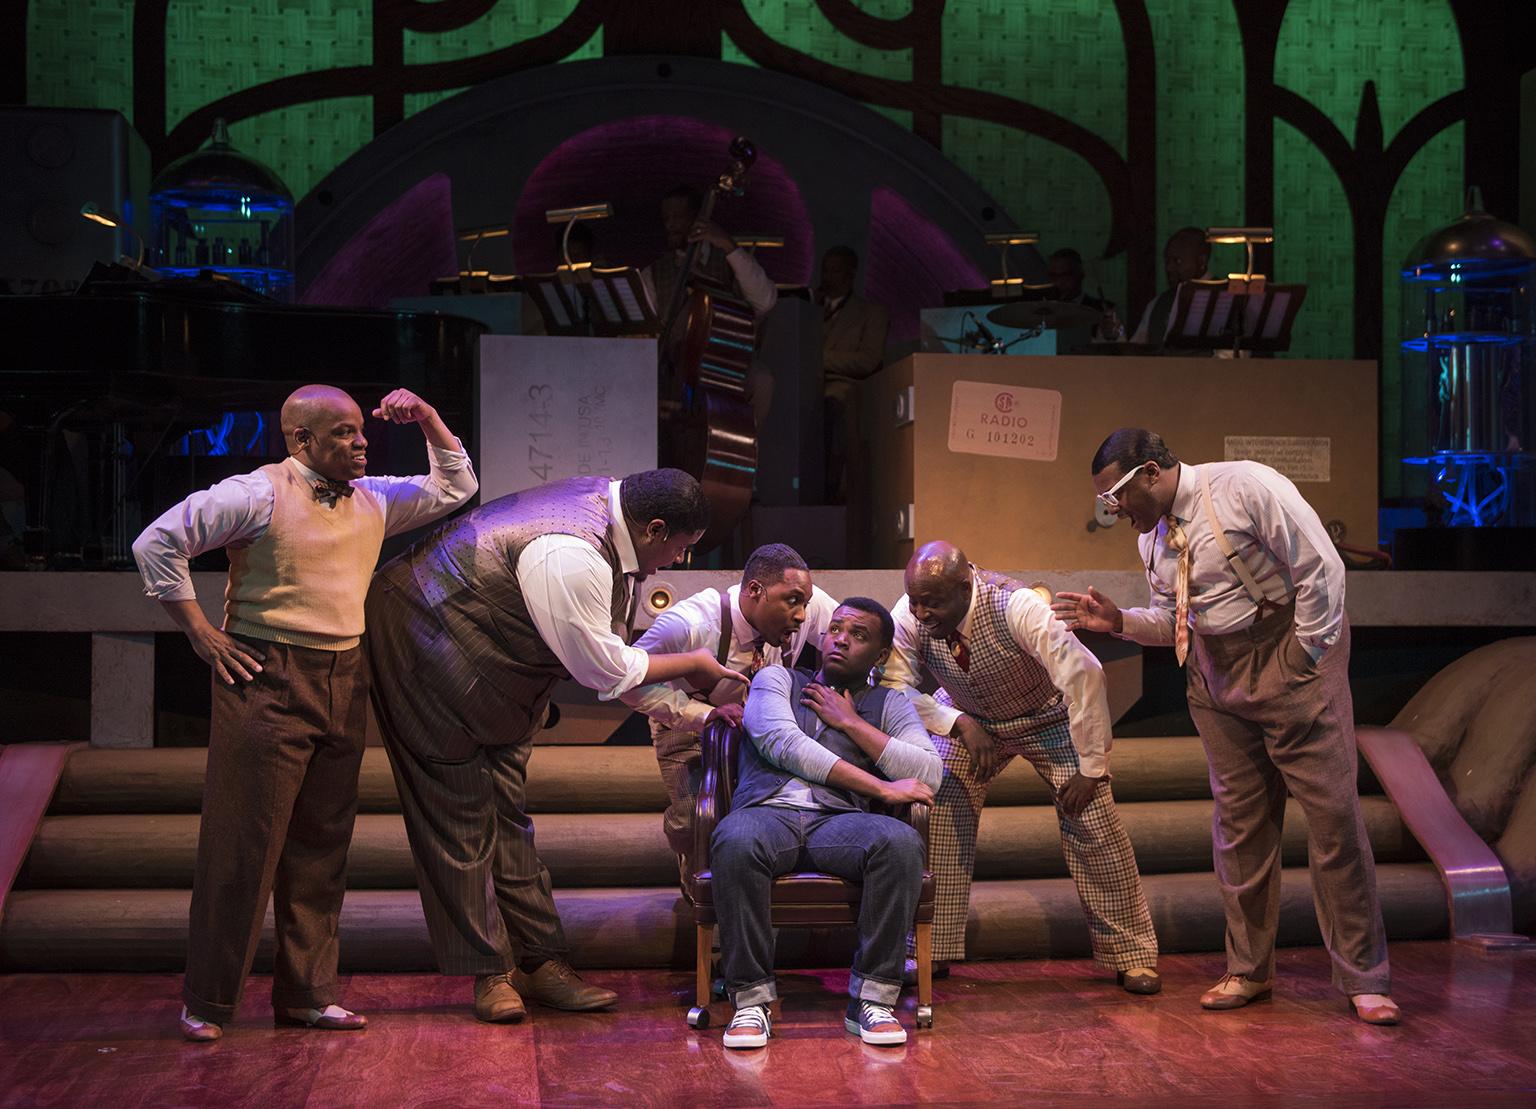 From left: Darrian Ford, Lorenzo Rush Jr., Eric A. Lewis, Stephen “Blu” Allen, James Earl Jones II and Kelvin Roston Jr. star in the Court Theatre production of “Five Guys Named Moe.” (Credit: Michael Brosilow)